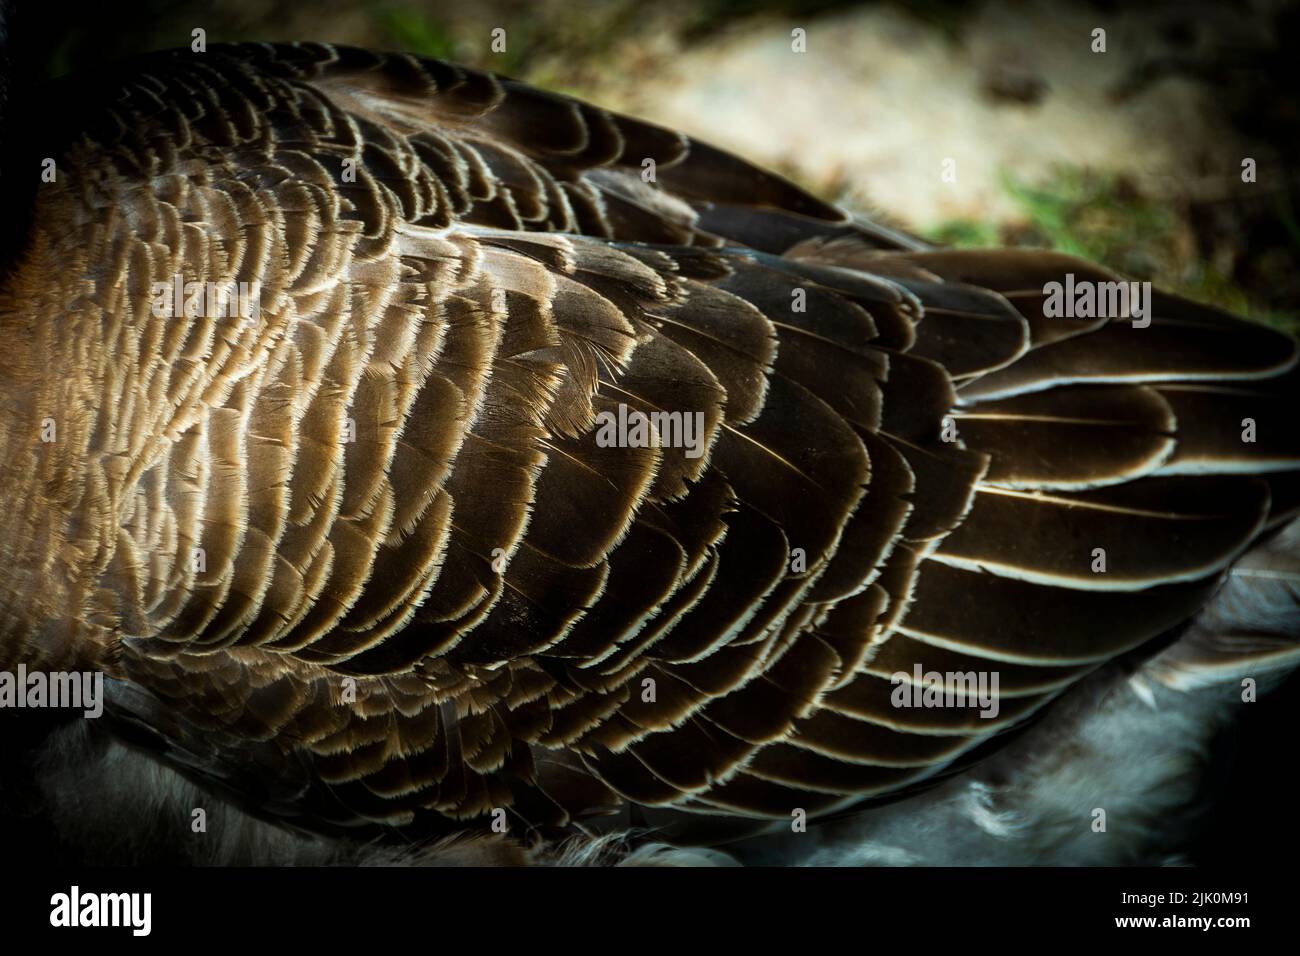 Closeup of a bird's body covered in brown feathers with white edges Stock Photo